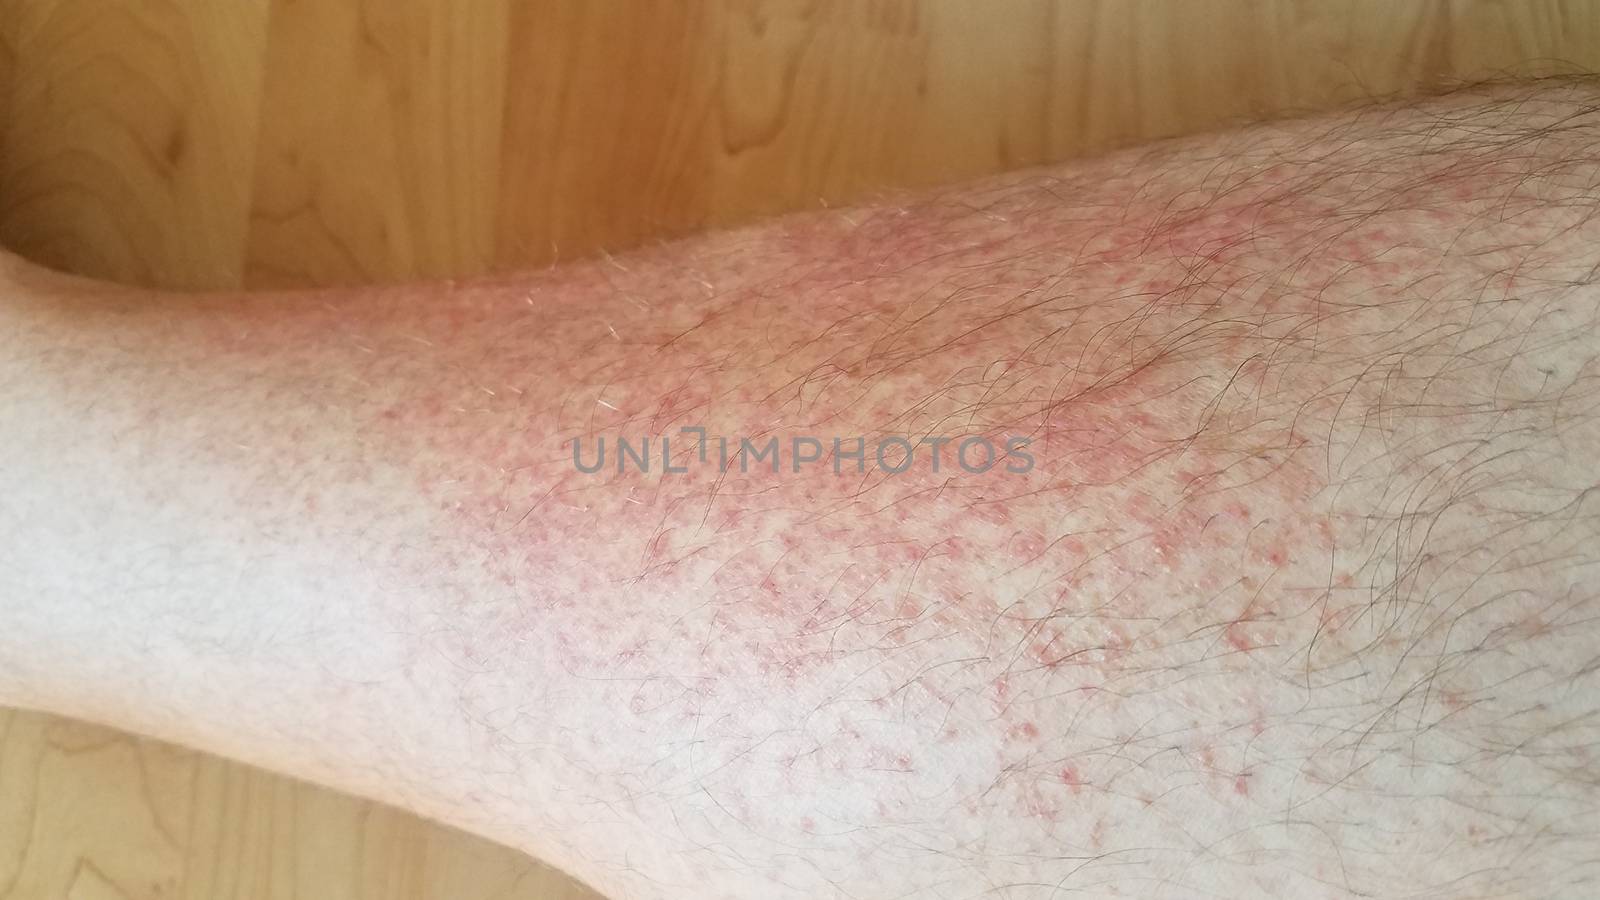 red itchy rash or inflammation on male leg